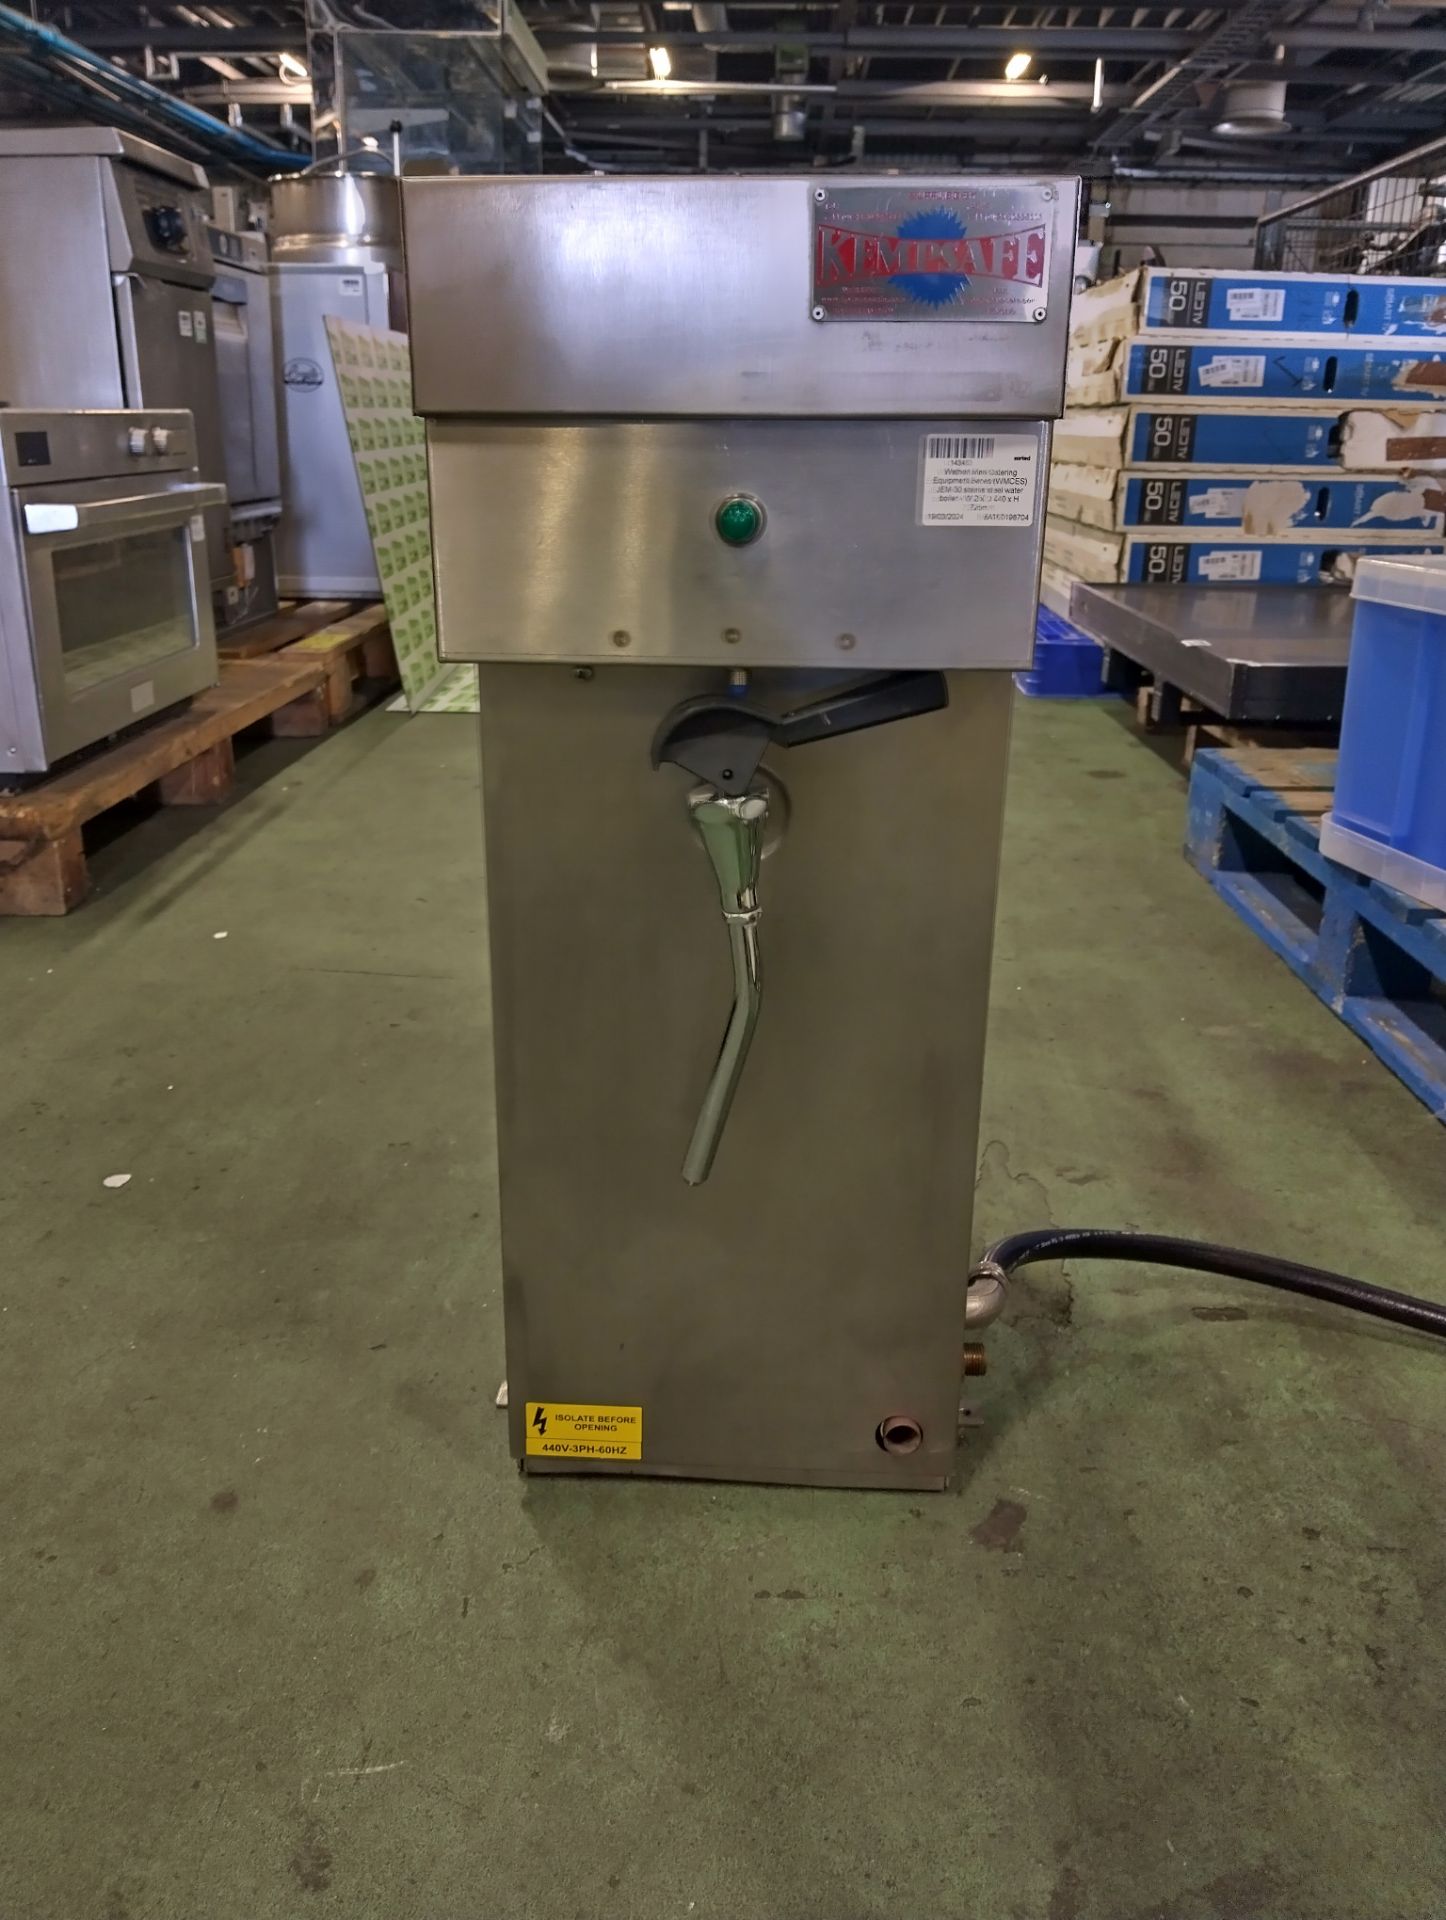 Wathen Marine Catering Equipment Services (WMCES) JEM-30 stainless steel water boiler - W 280